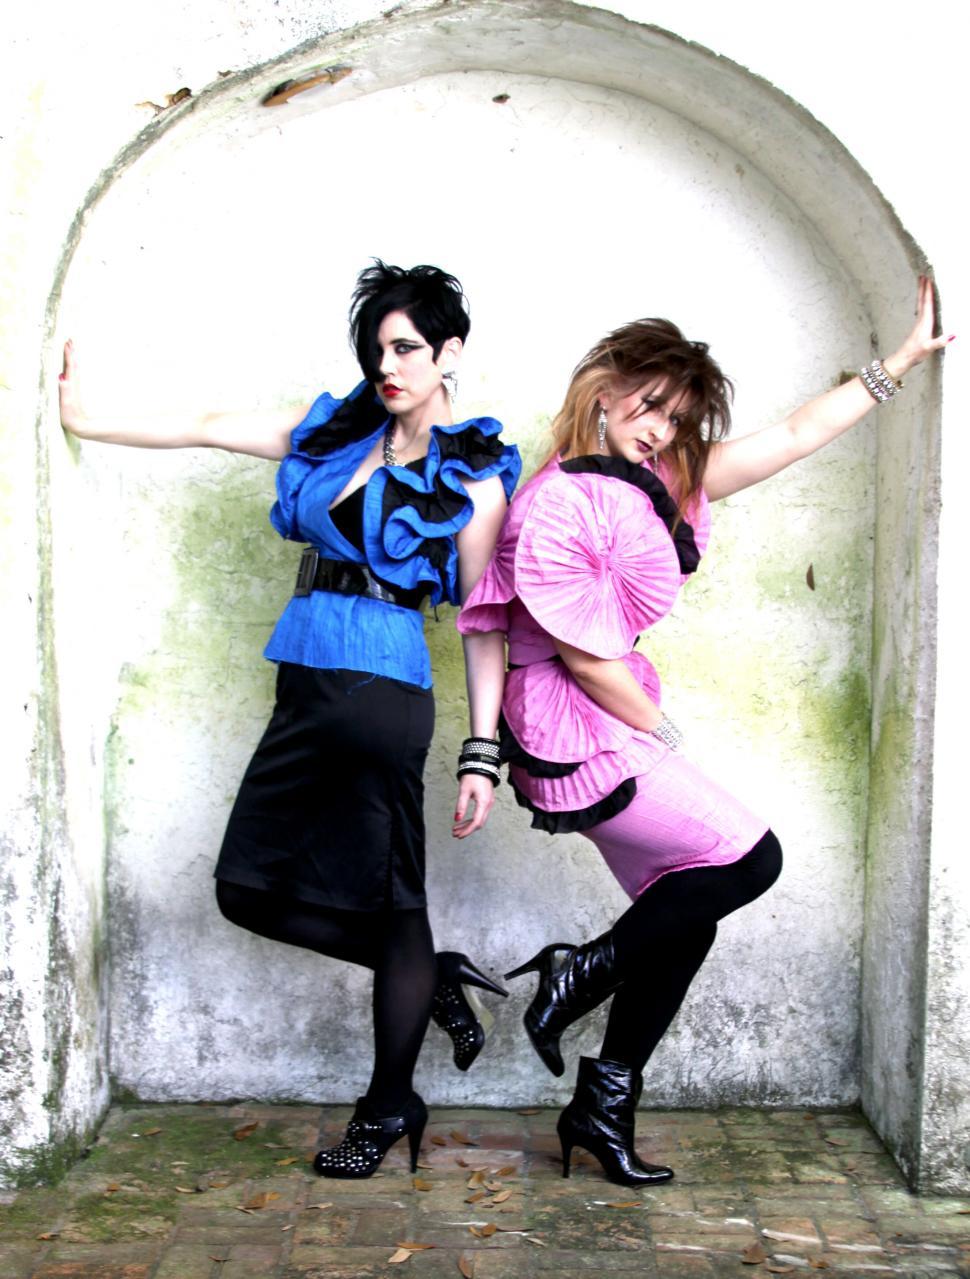 Free Image of Two women posing in vibrant outfits 